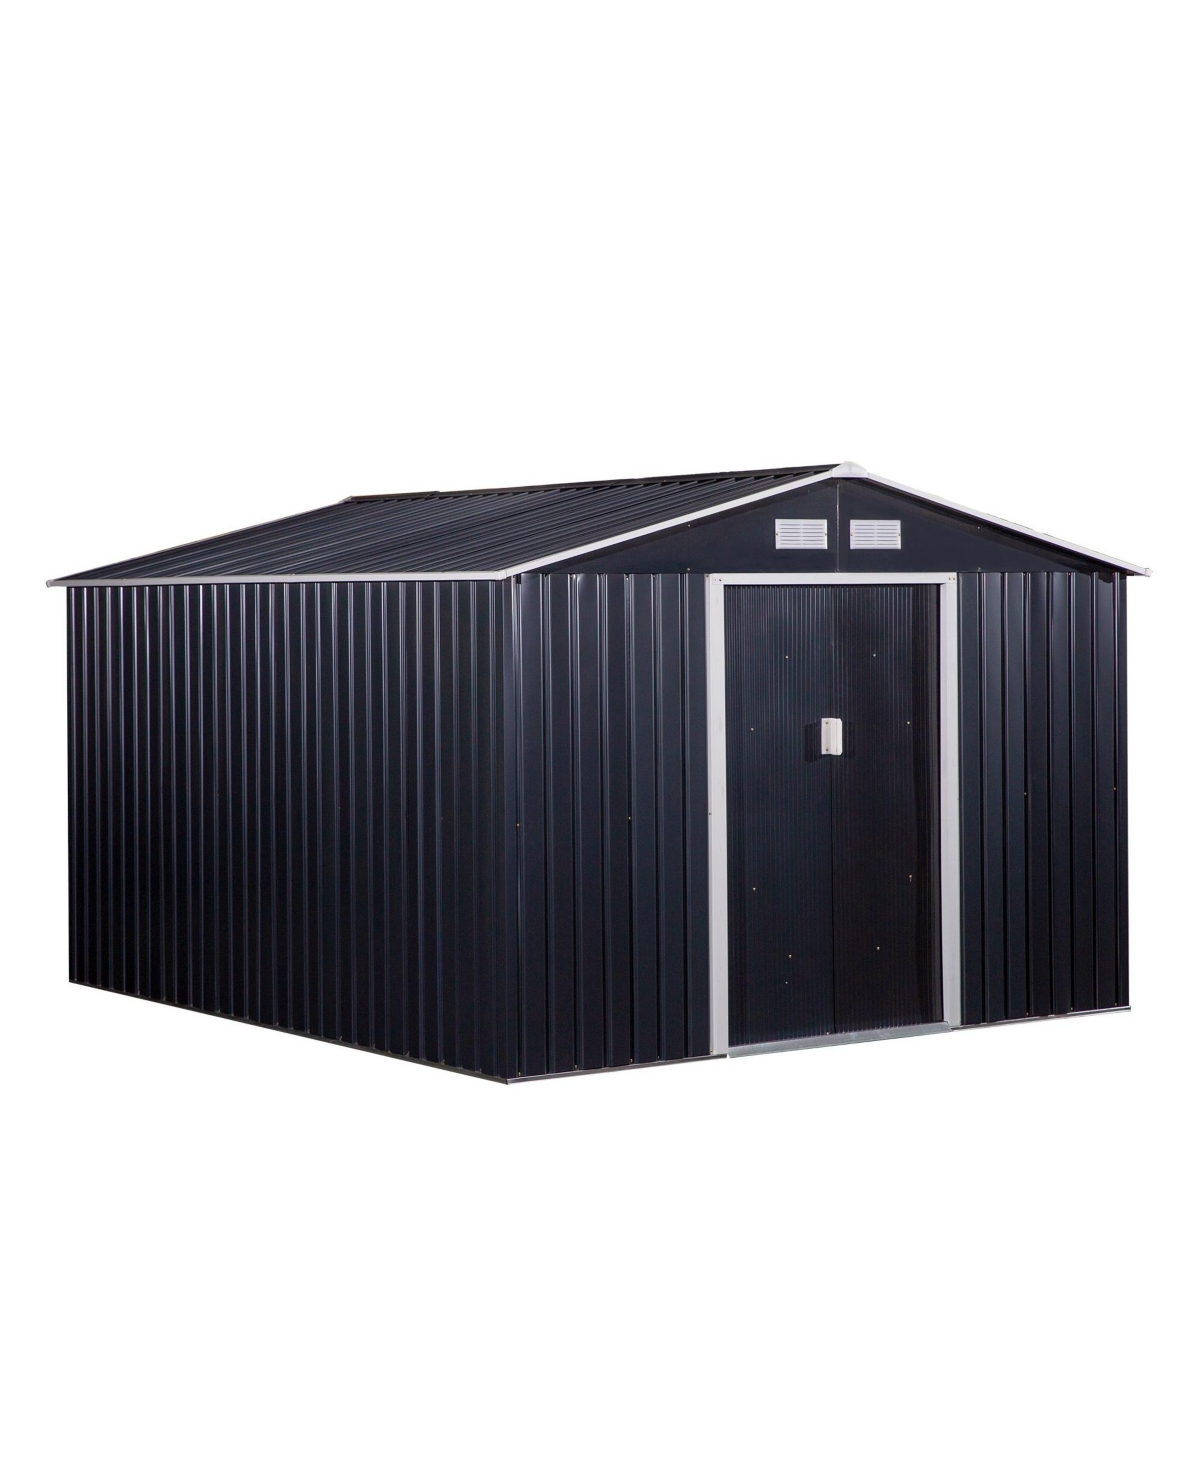 11' x 9' Metal Storage Shed Garden Tool House with Double Sliding Doors, 4 Air Vents for Backyard, Patio, Lawn Dark Grey - Grey